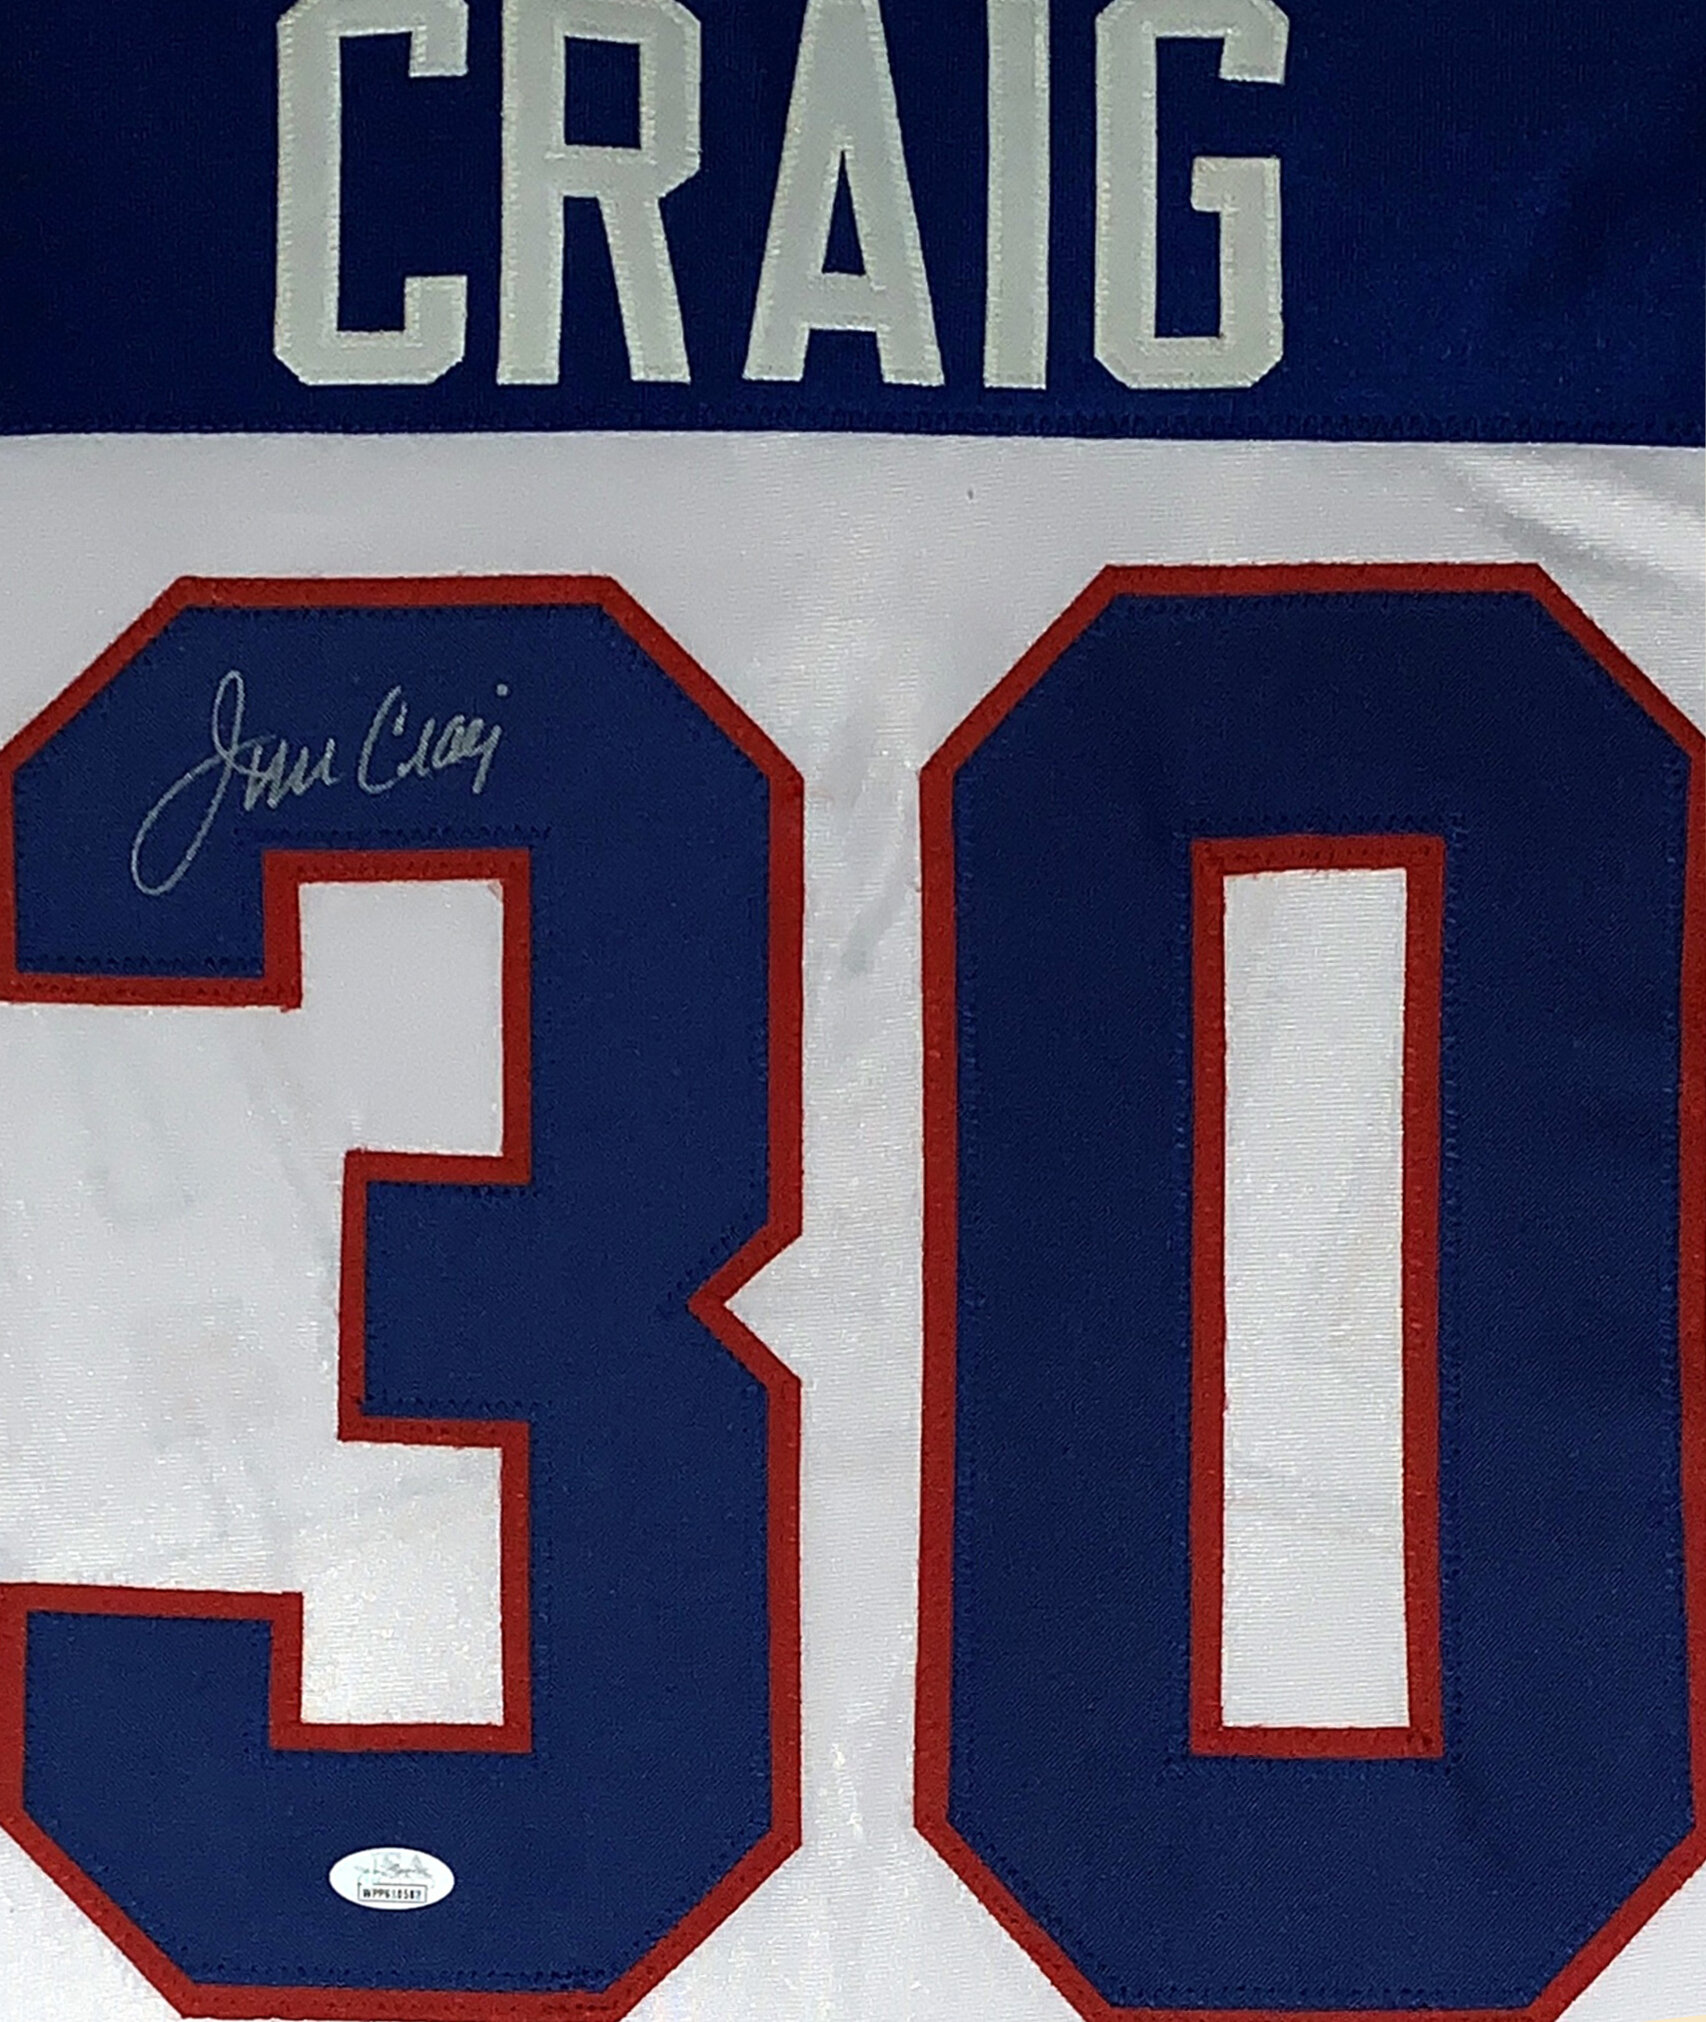 1980 USA Hockey Team Autographed 'Miracle' Jersey with Eruzione, Craig &  More